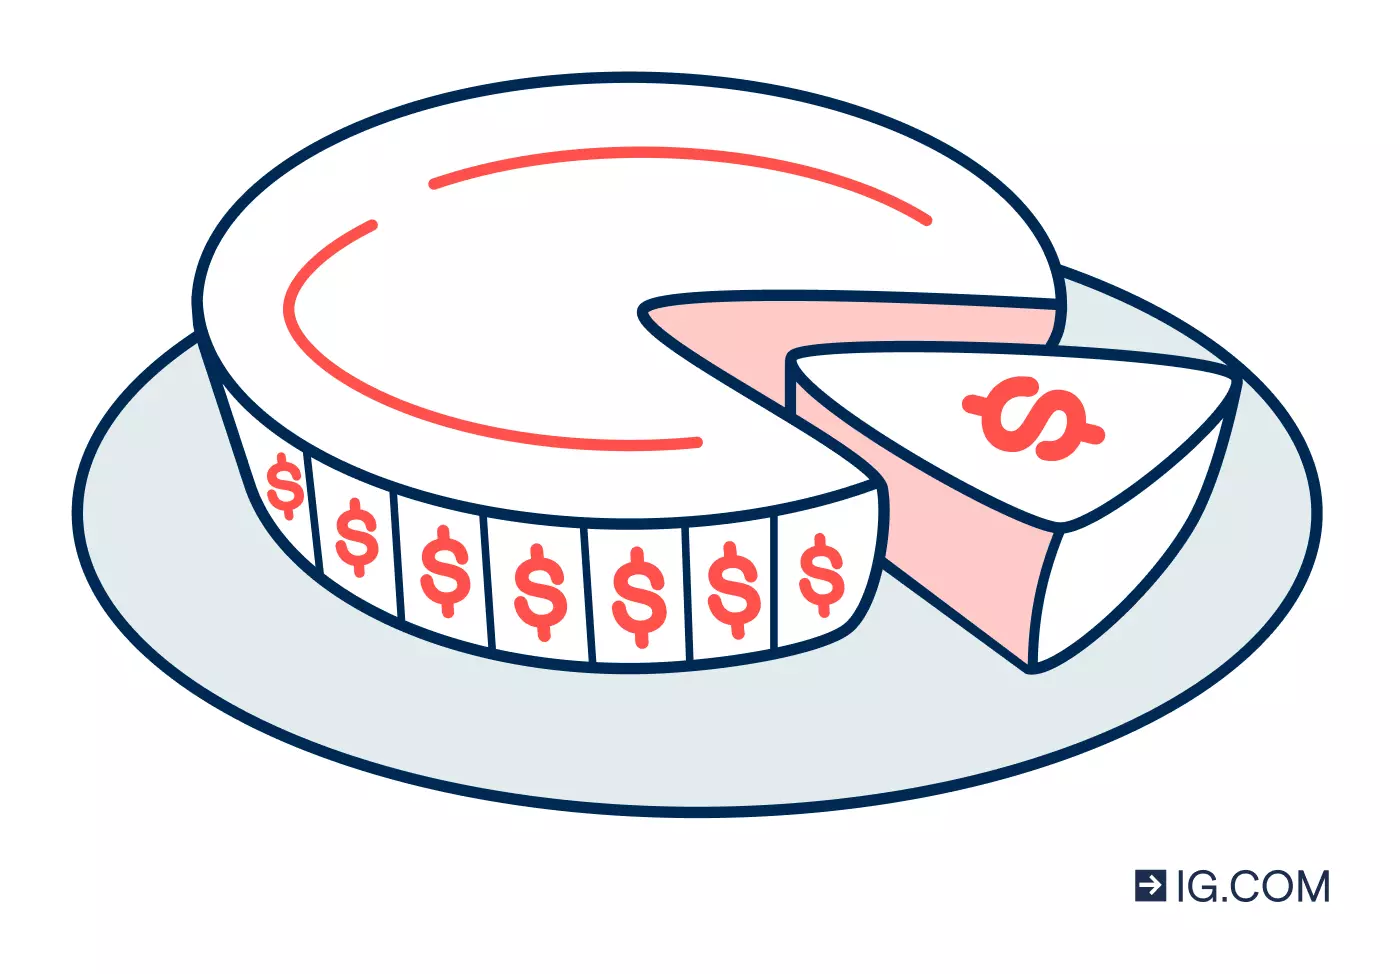 Image of a pie on a plate, divided into different sizes to represent equity in a company and one slice of pie cut out to indicate the stake in a company.